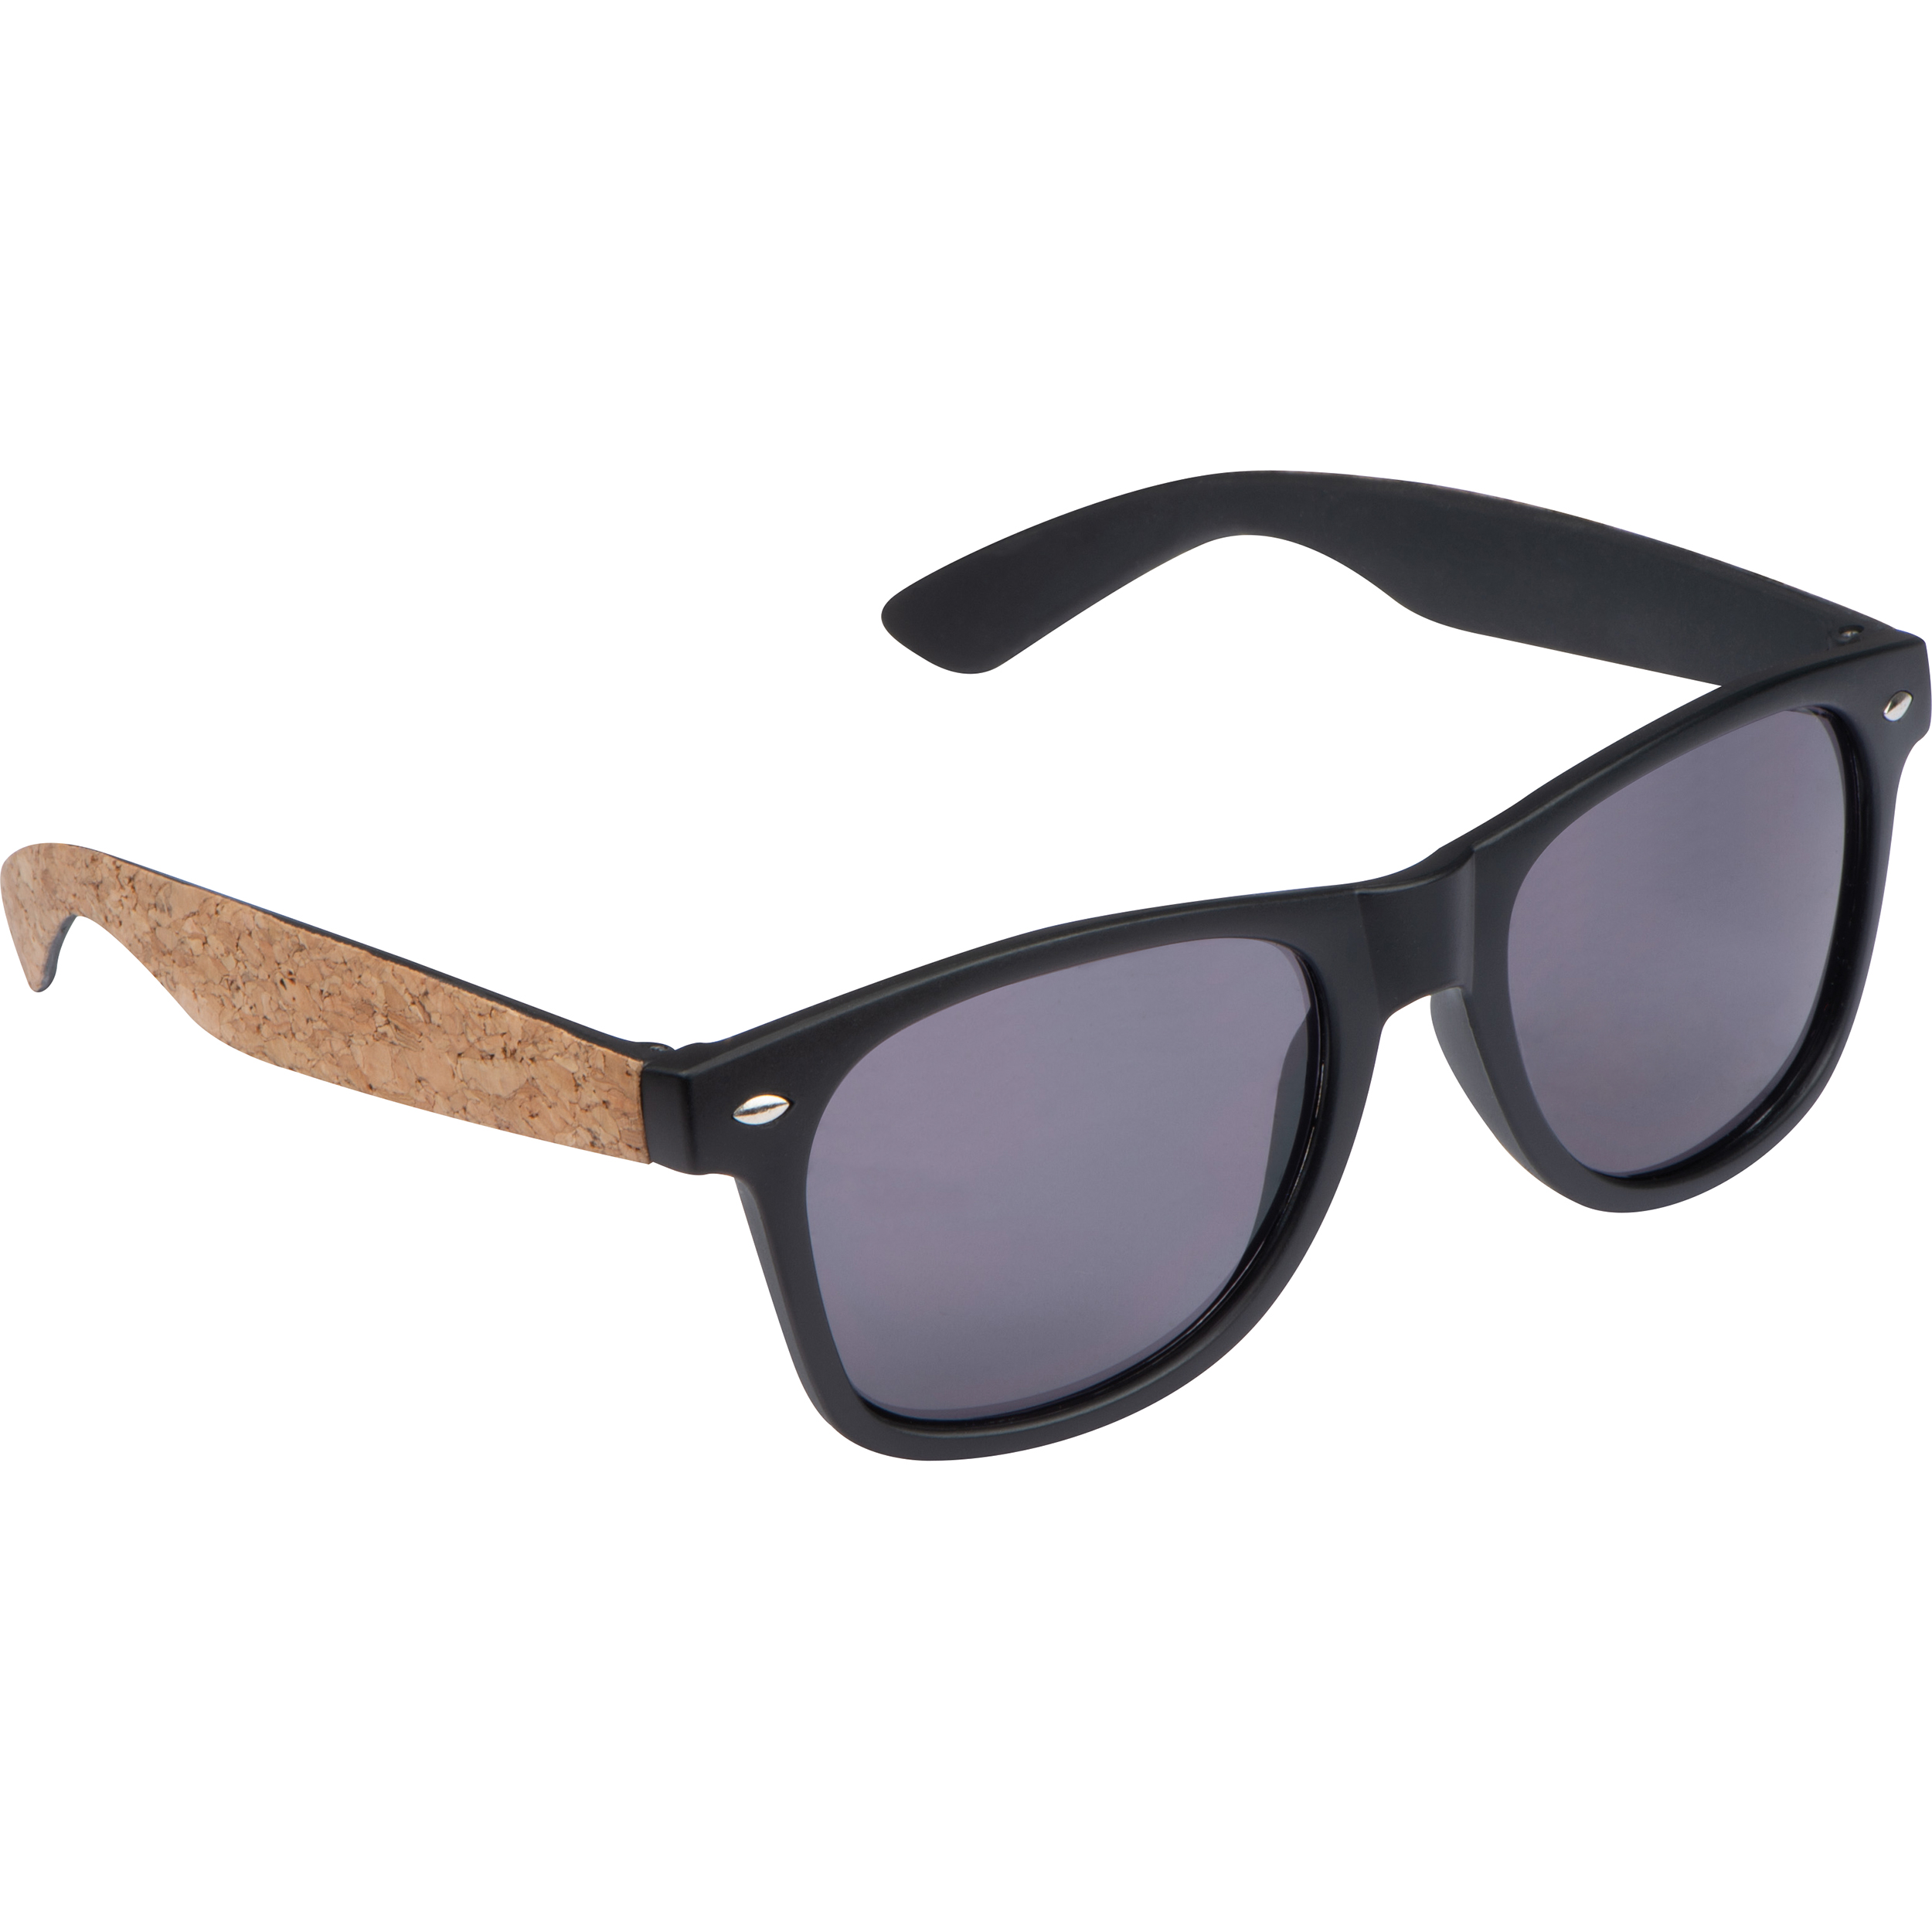 Sunglasses with cork covered temples